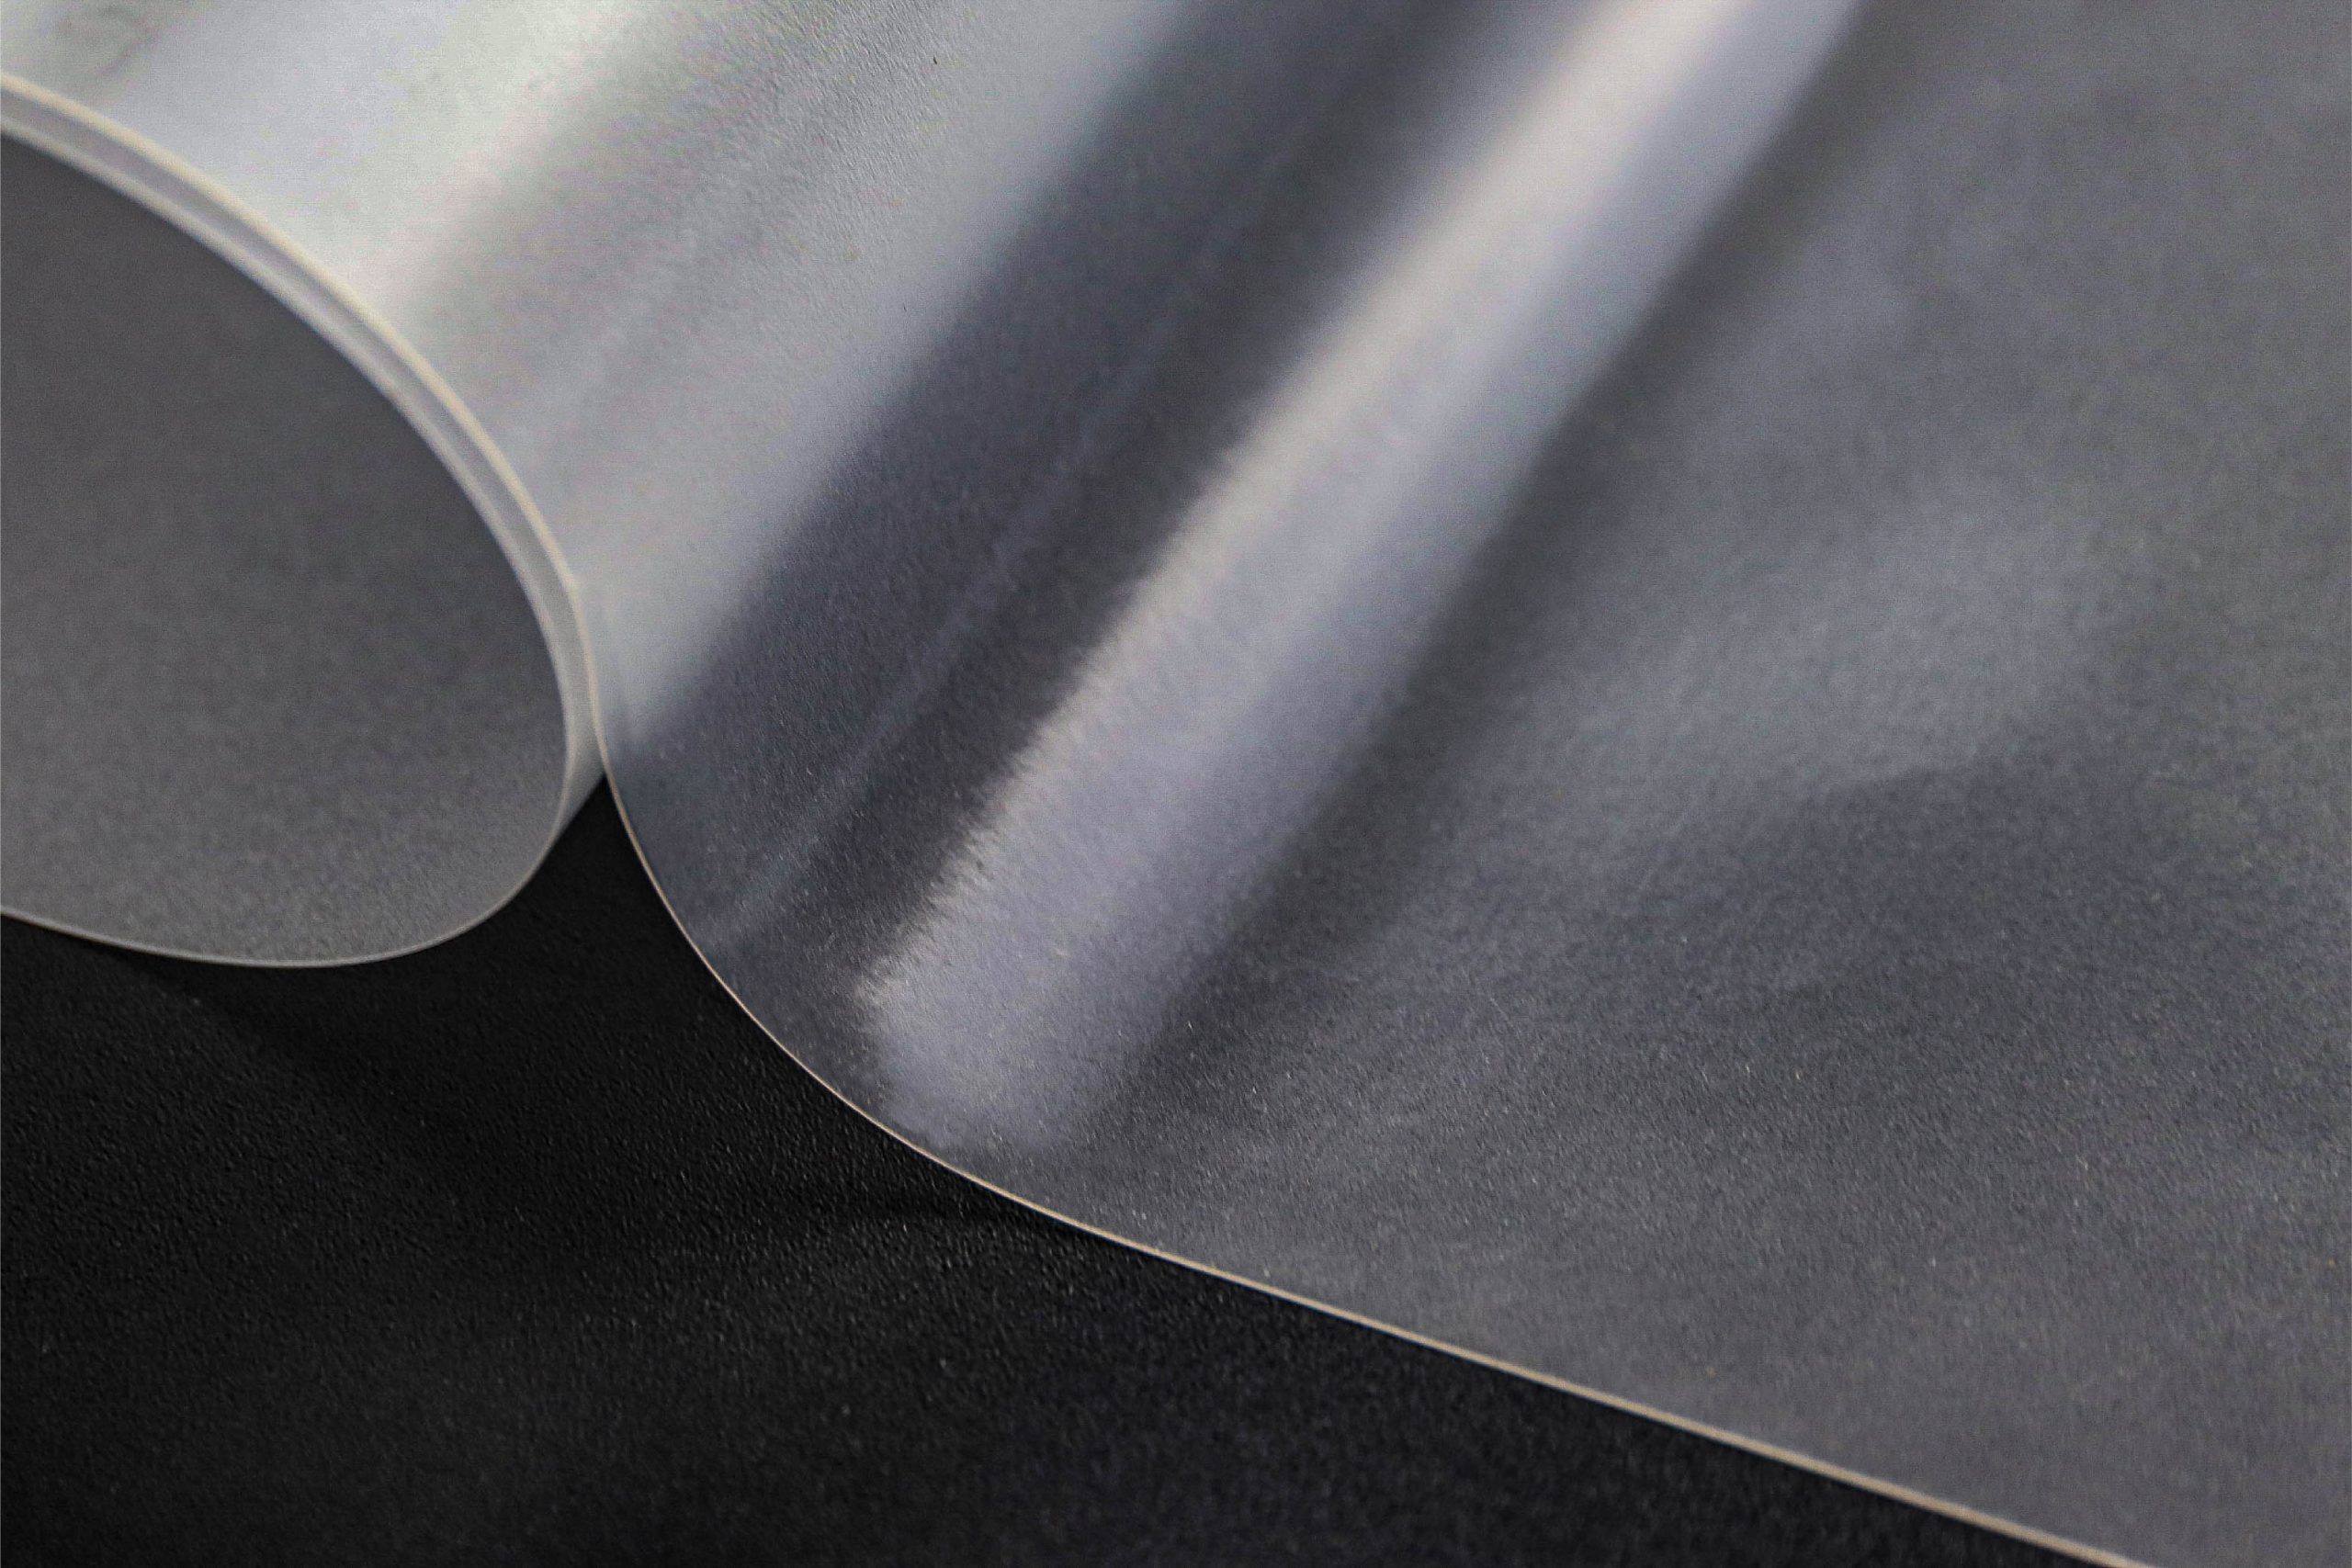 Antifungal Silicone Rubber Sheet Compo-SiL® Passes ASTM G21 Certification